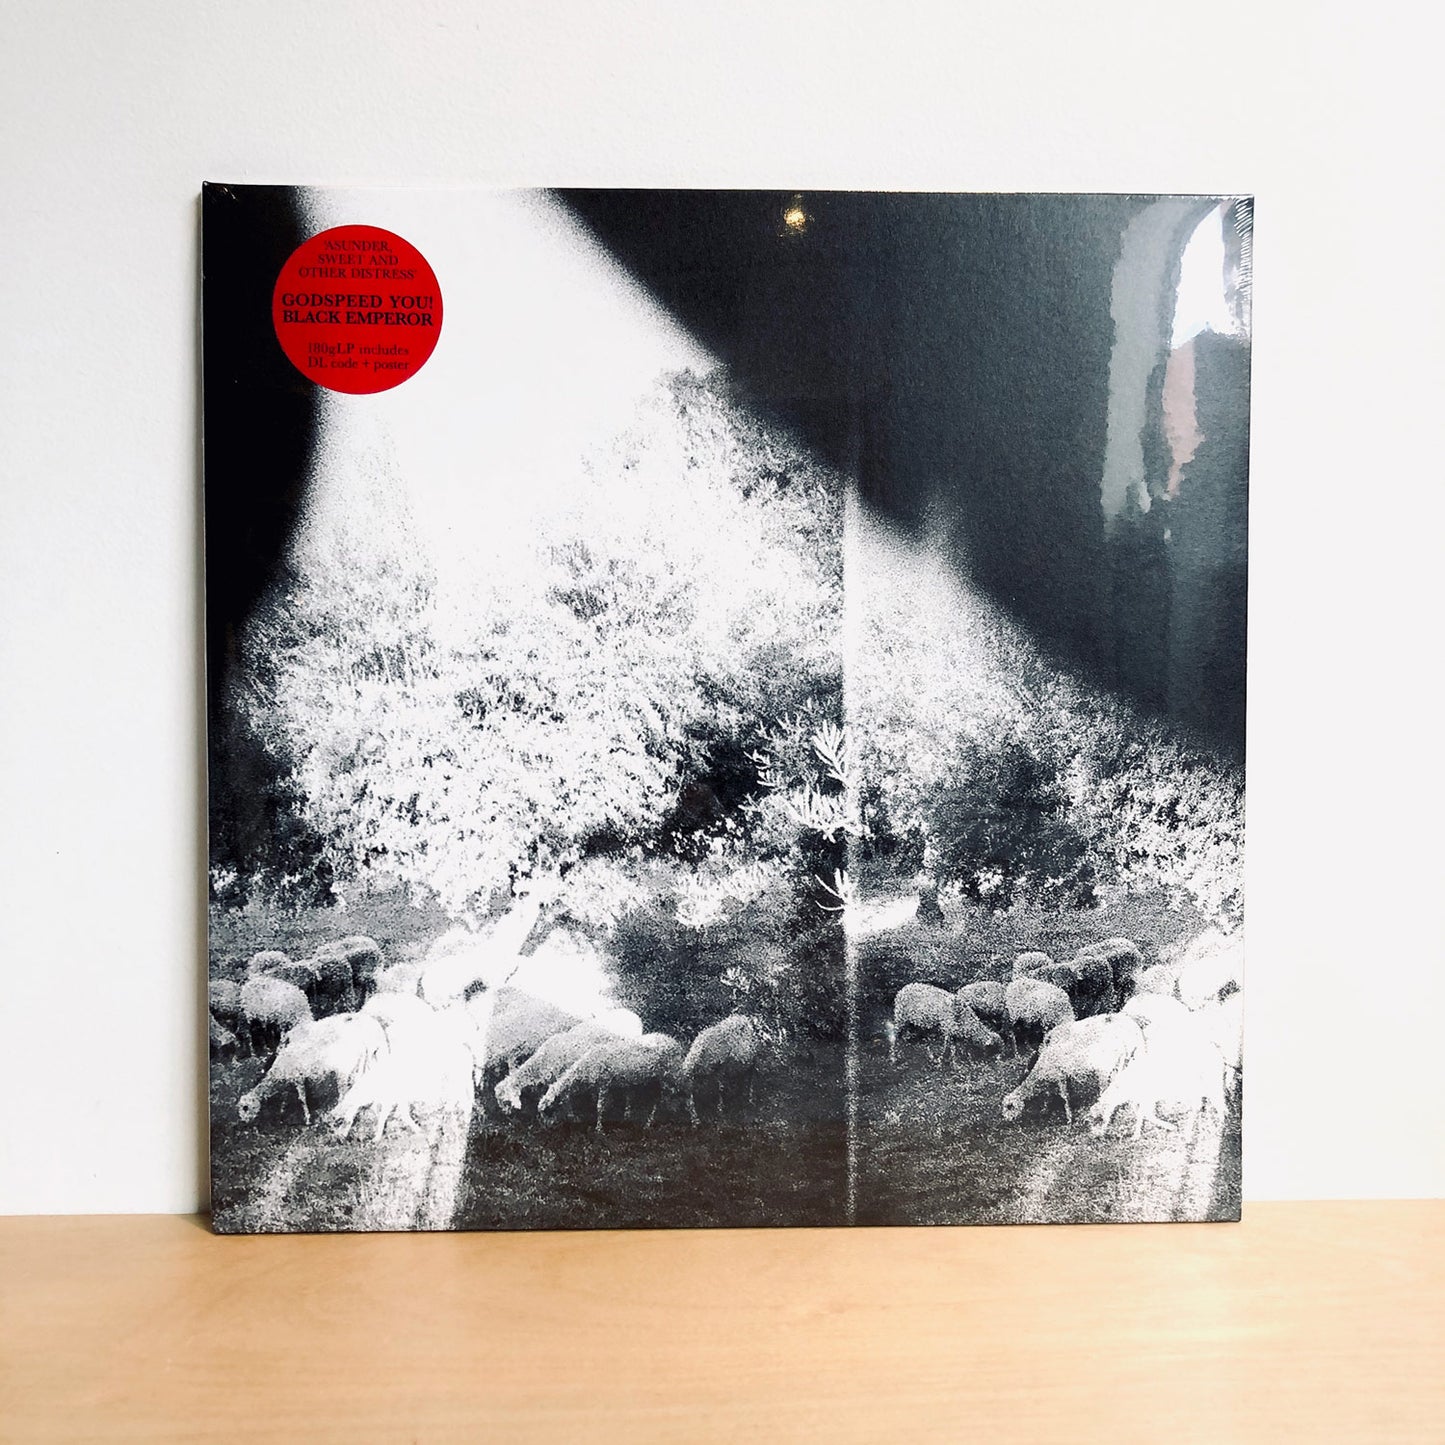 Godspeed You! Black Emperor - Asunder, Sweet and Other Distress. LP